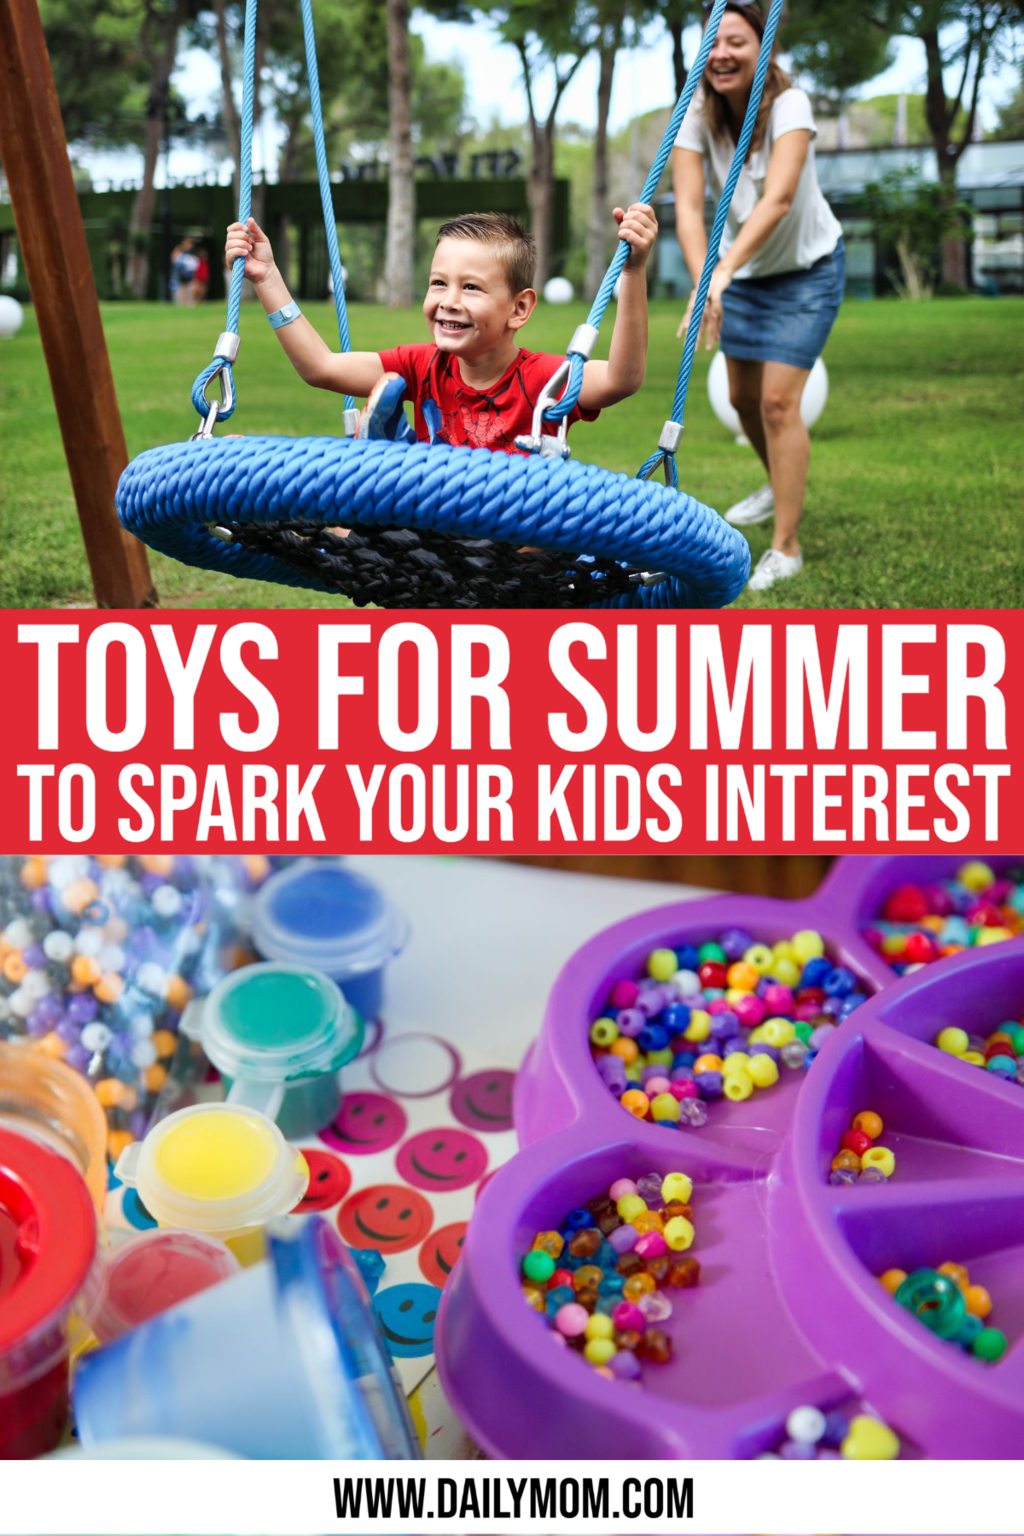 15 Must-have Kids Gear Items & Fascinating Toys For Summer